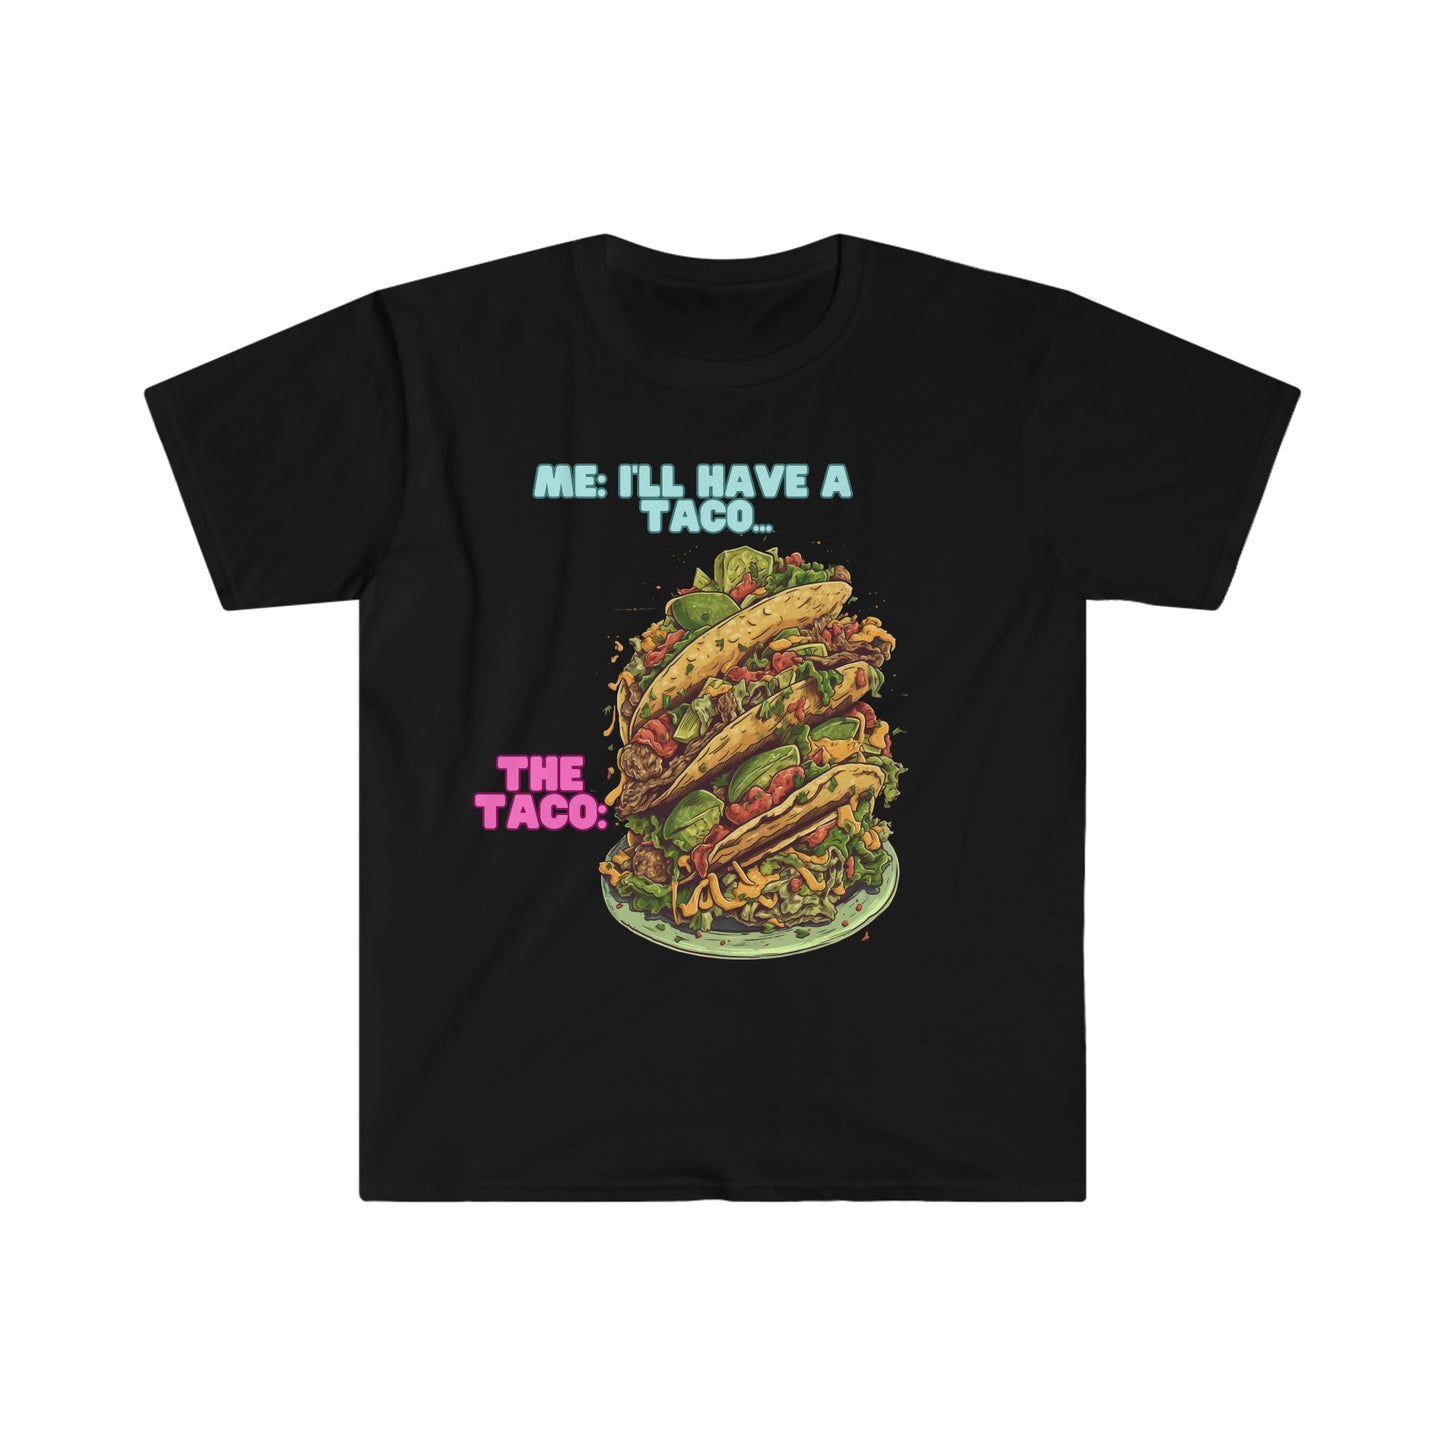 Have a Taco - Unisex Softstyle T-Shirt